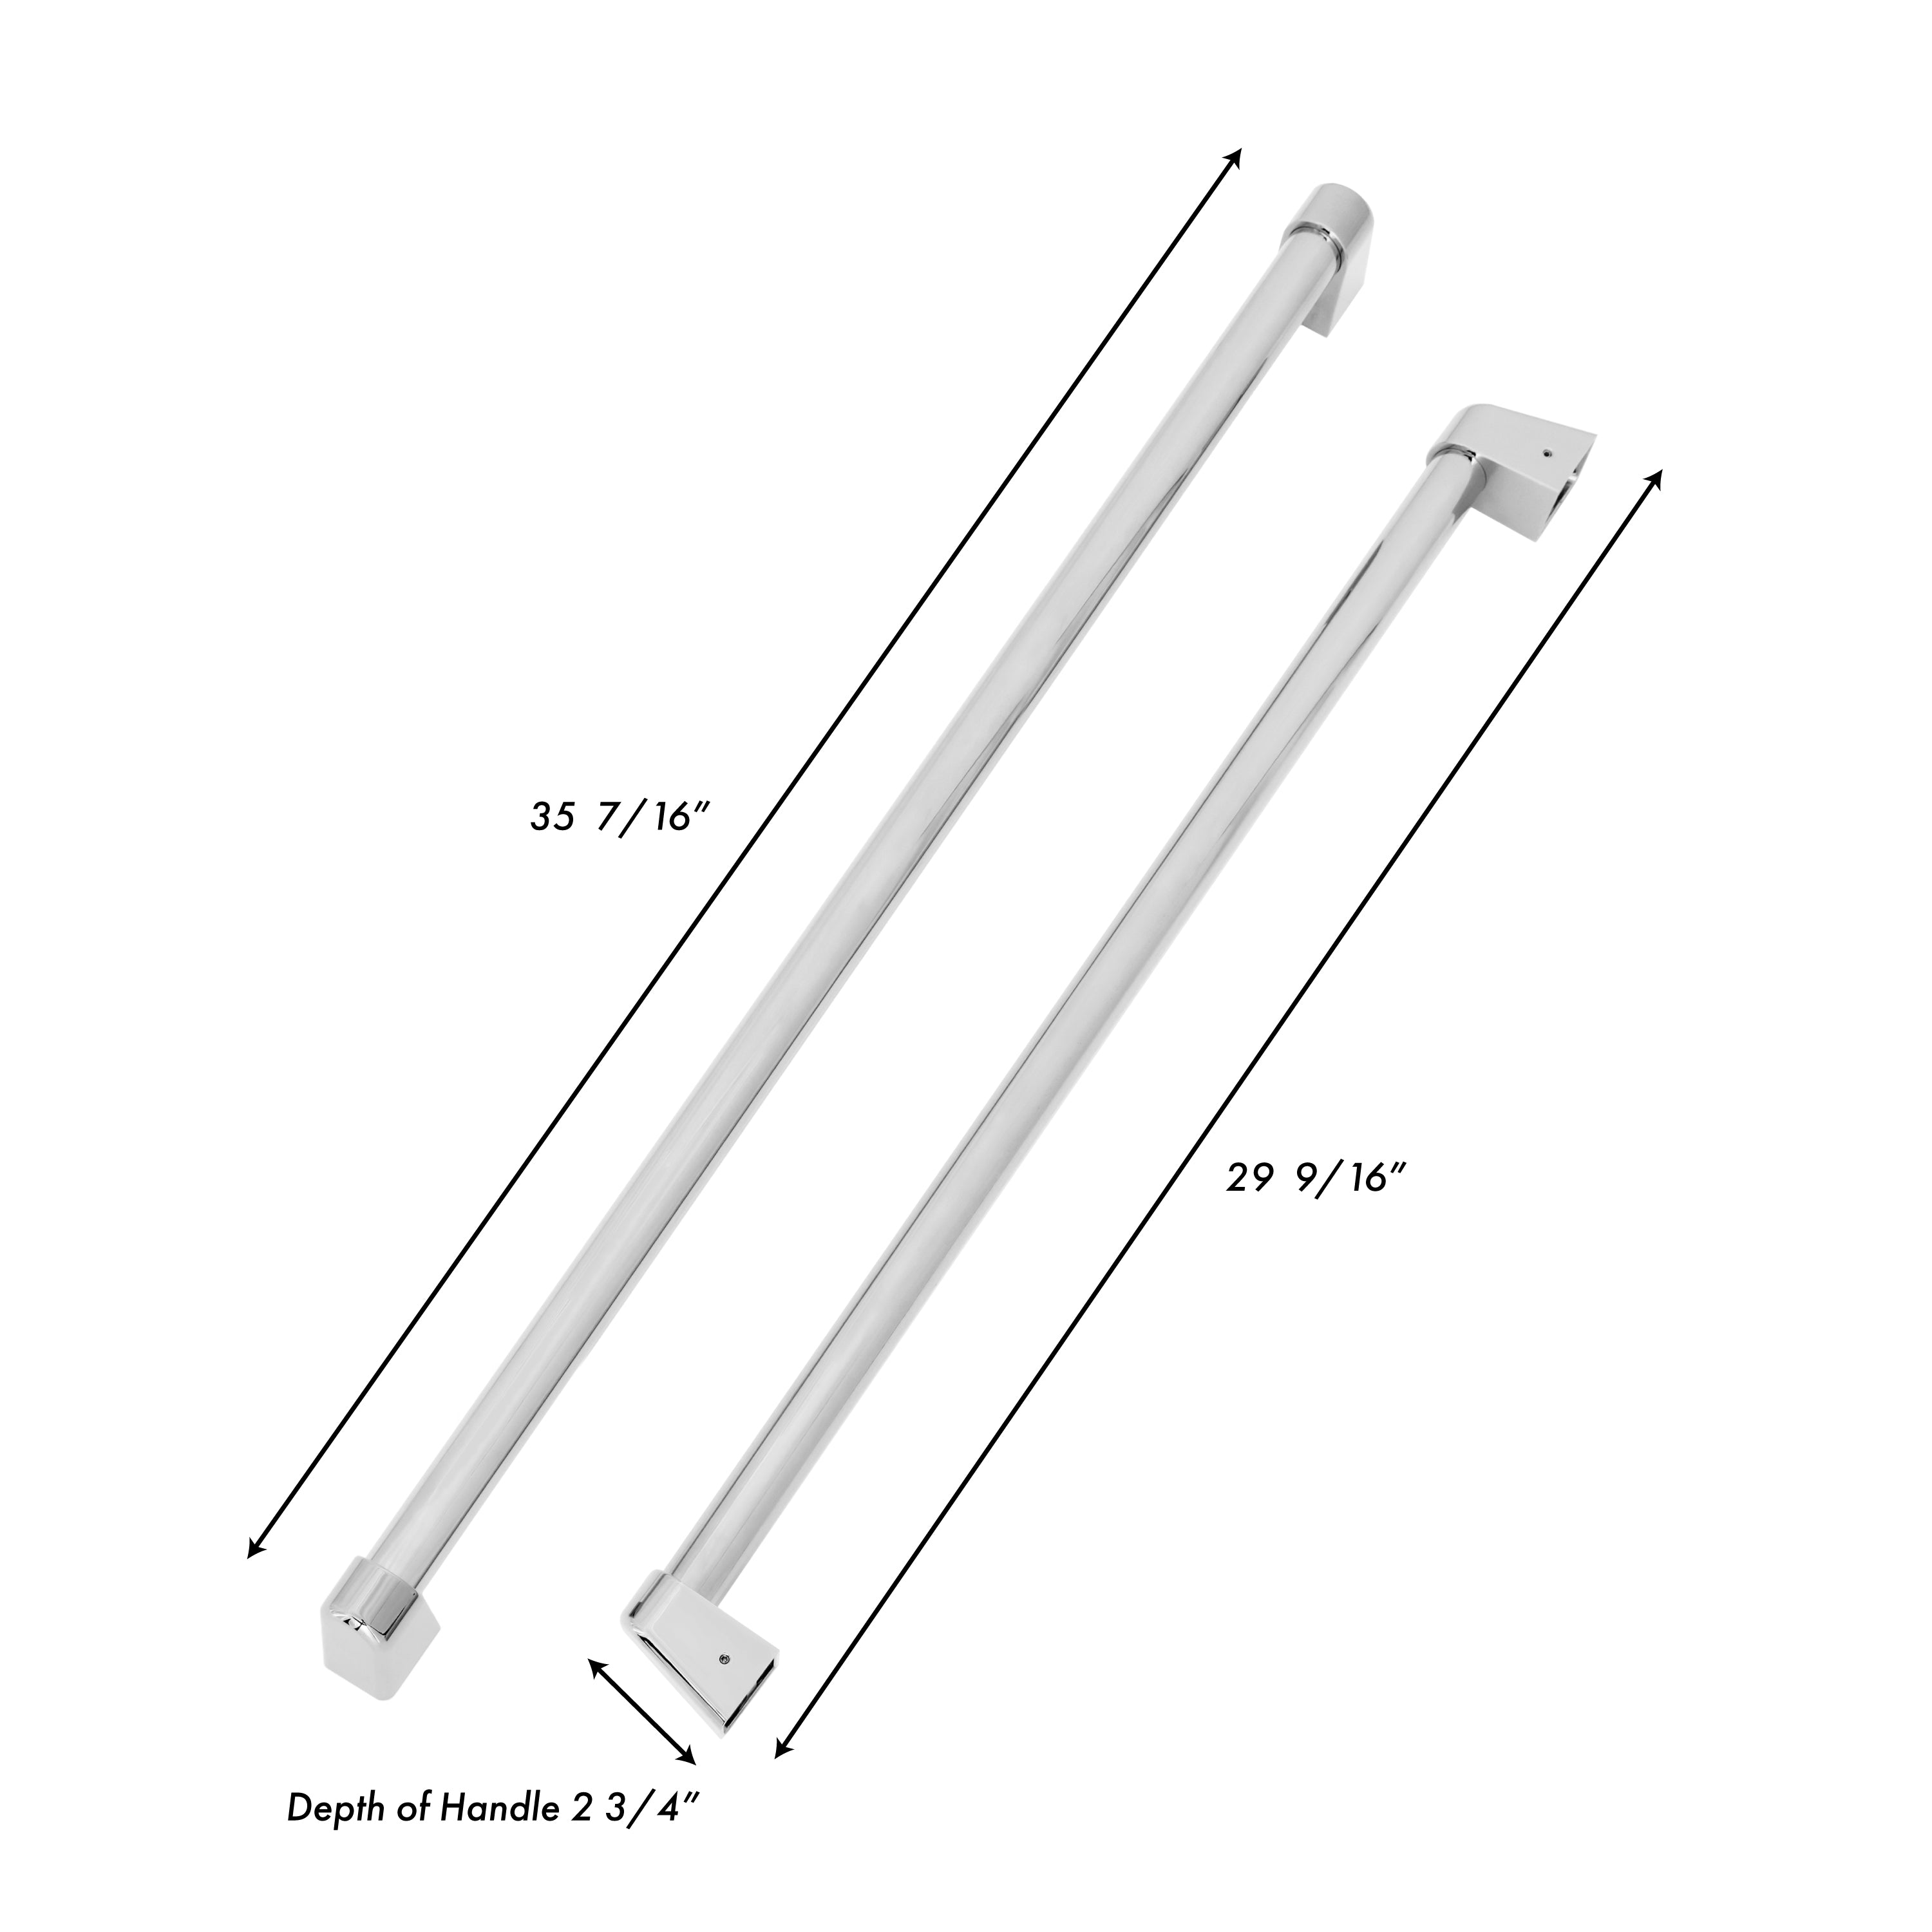 ZLINE 60" Refrigerator Panels in Stainless Steel for a 60" Buit-in Refrigerator (RPBIV-304-60)